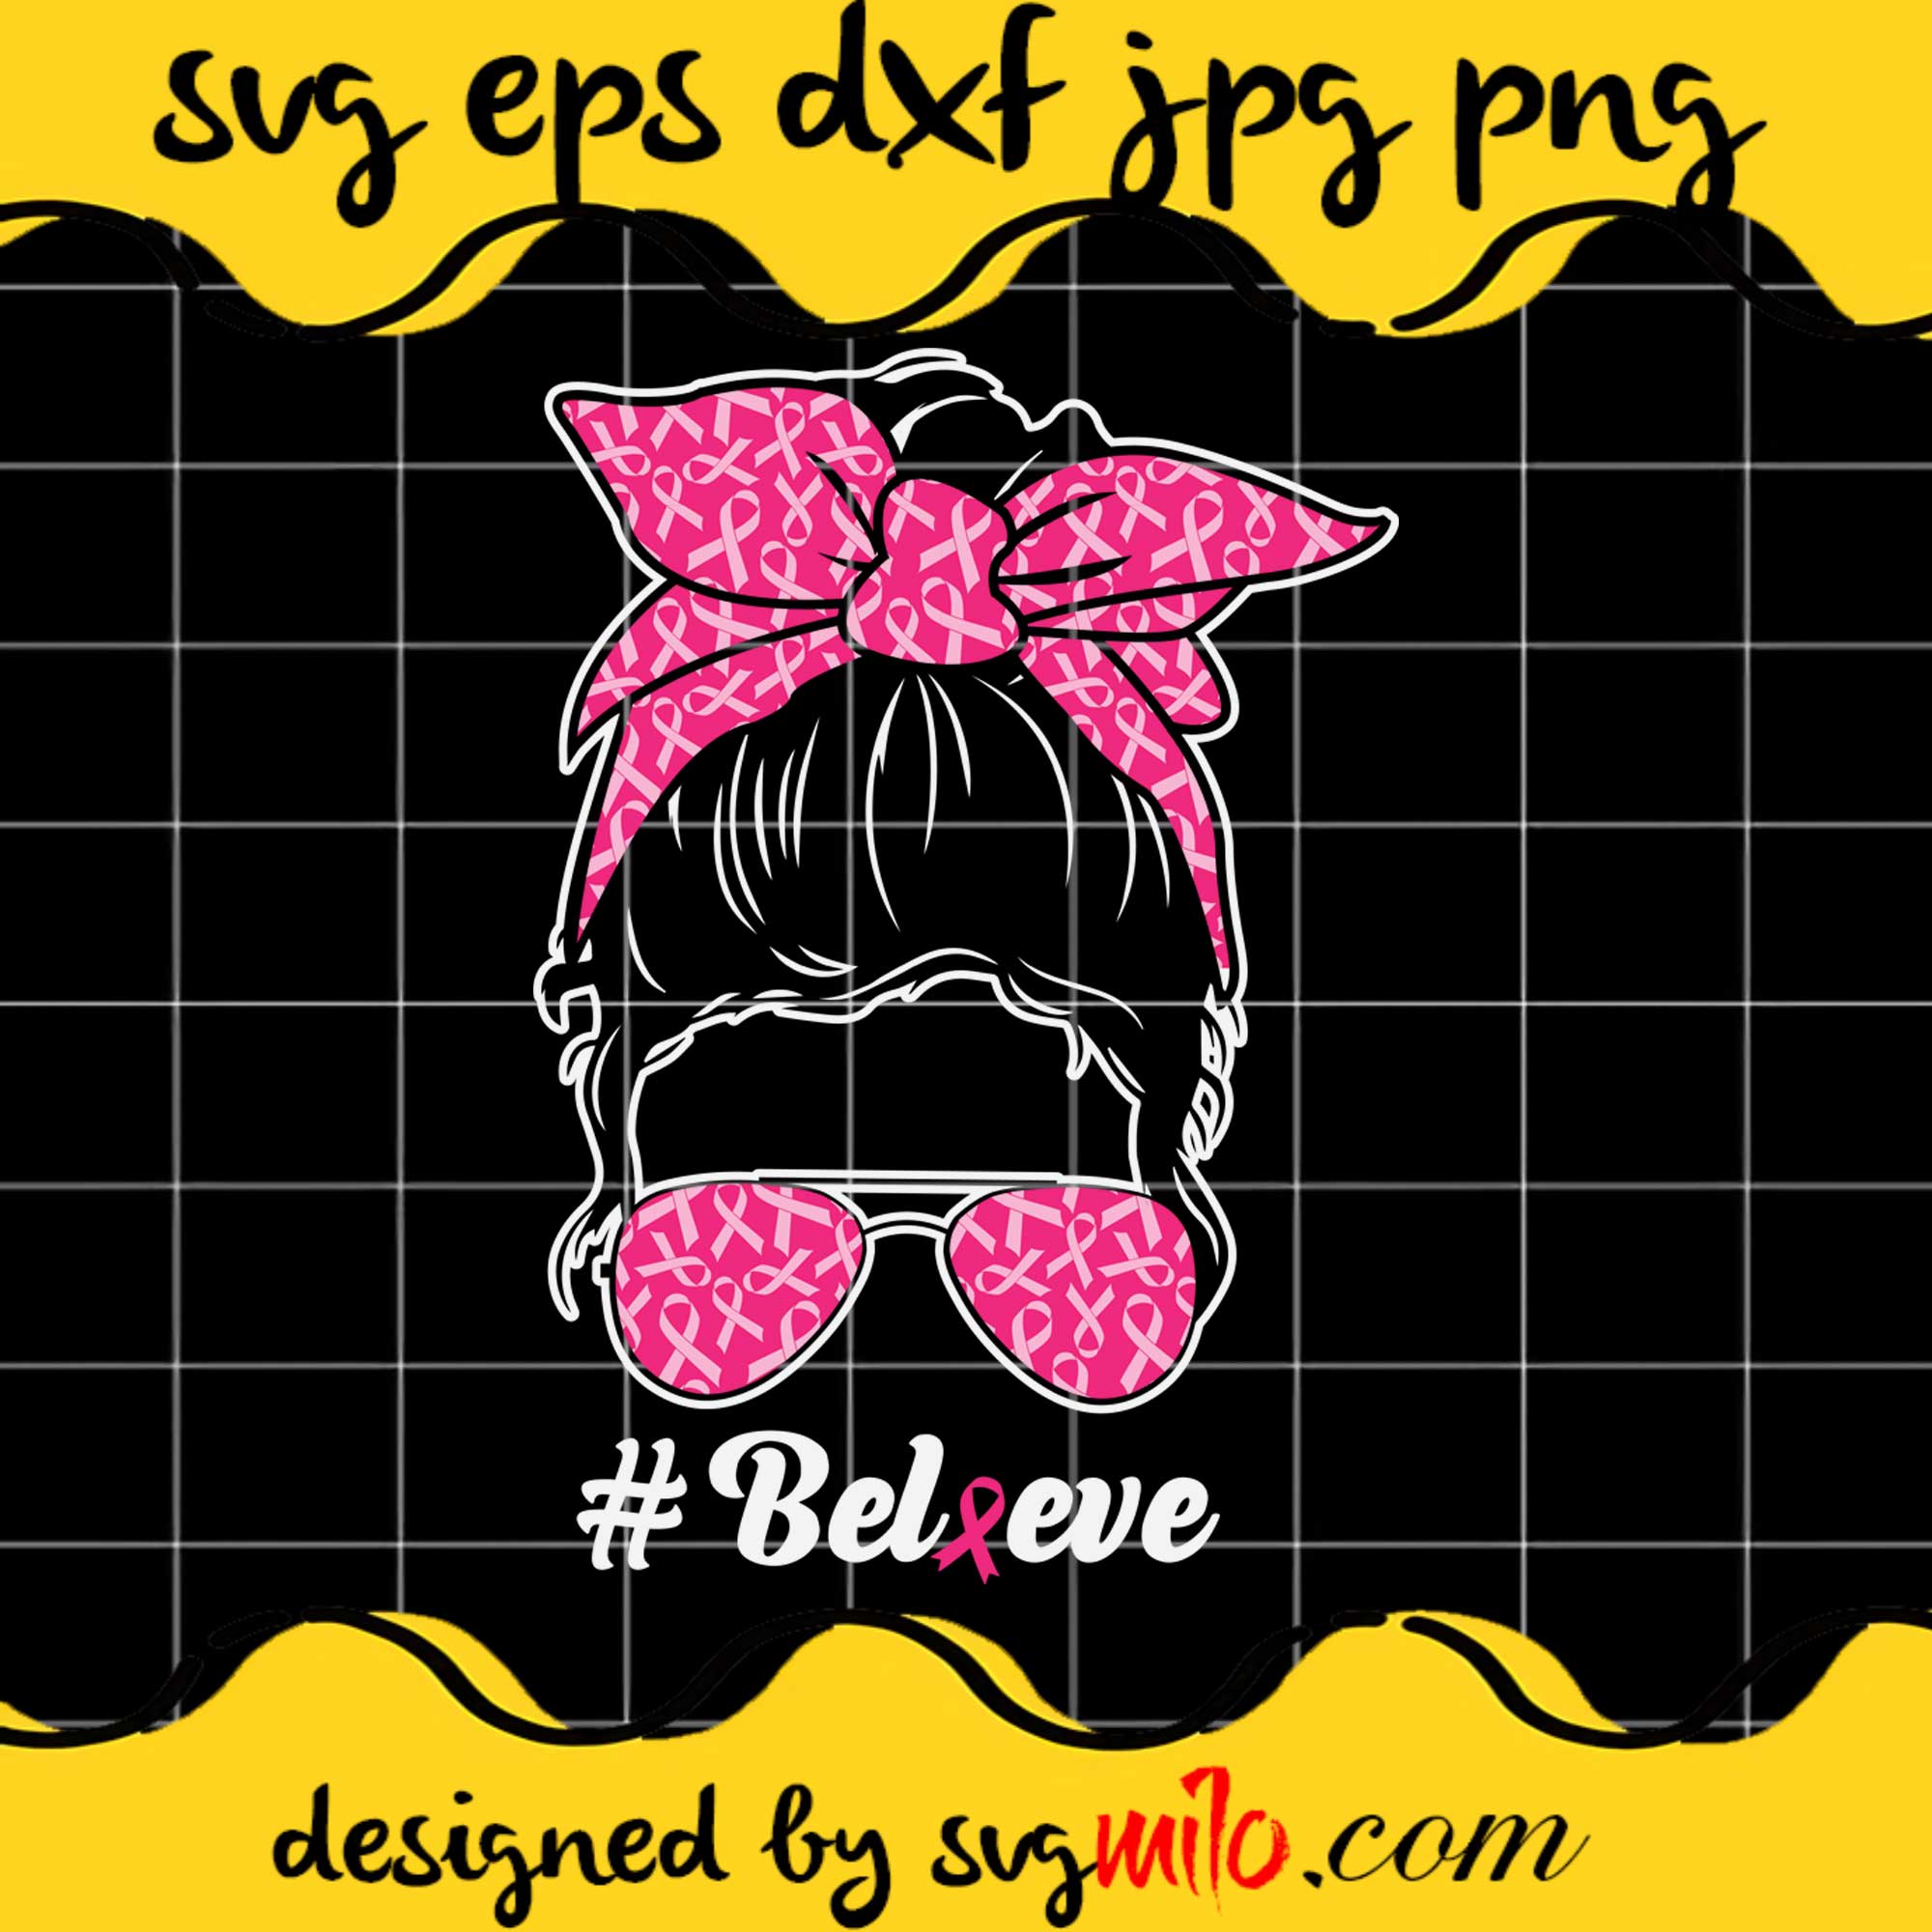 Breast Cancer Awareness Messy Bun SVG PNG DXF EPS Cut Files For Cricut Silhouette,Premium quality SVG - SVGMILO